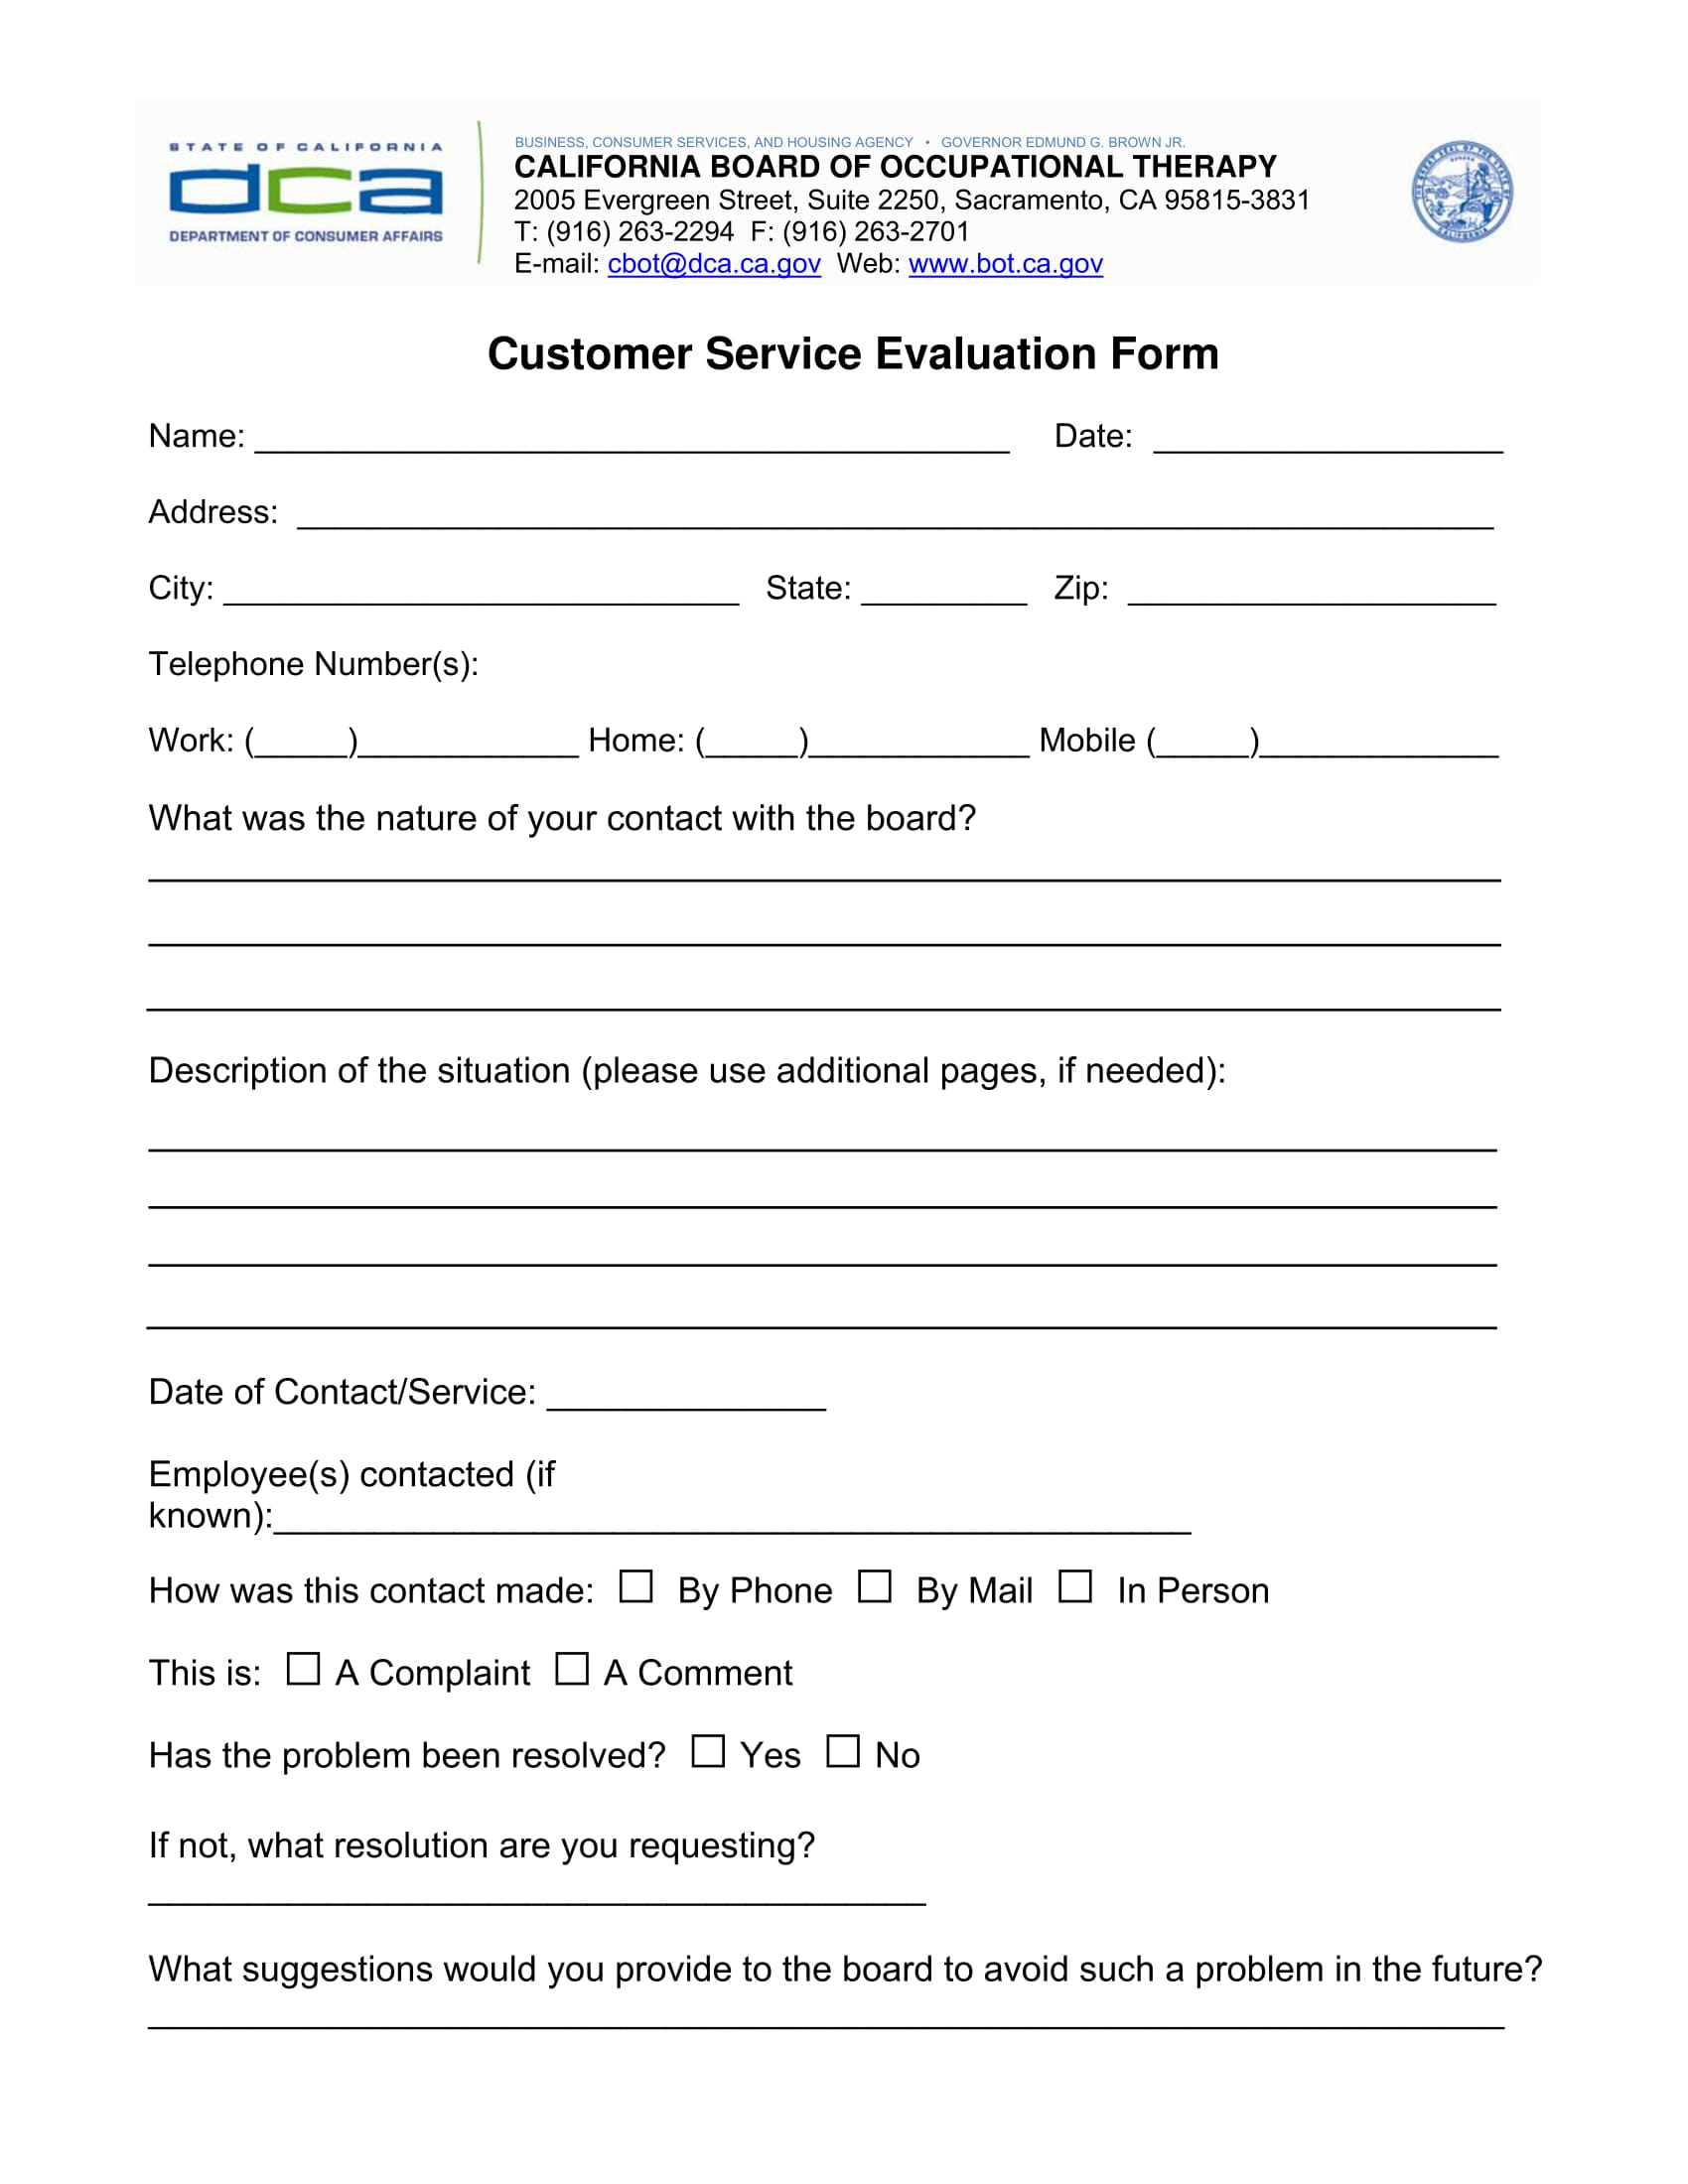 FREE 10+ Customer Service Evaluation Forms in PDF Within Blank Evaluation Form Template